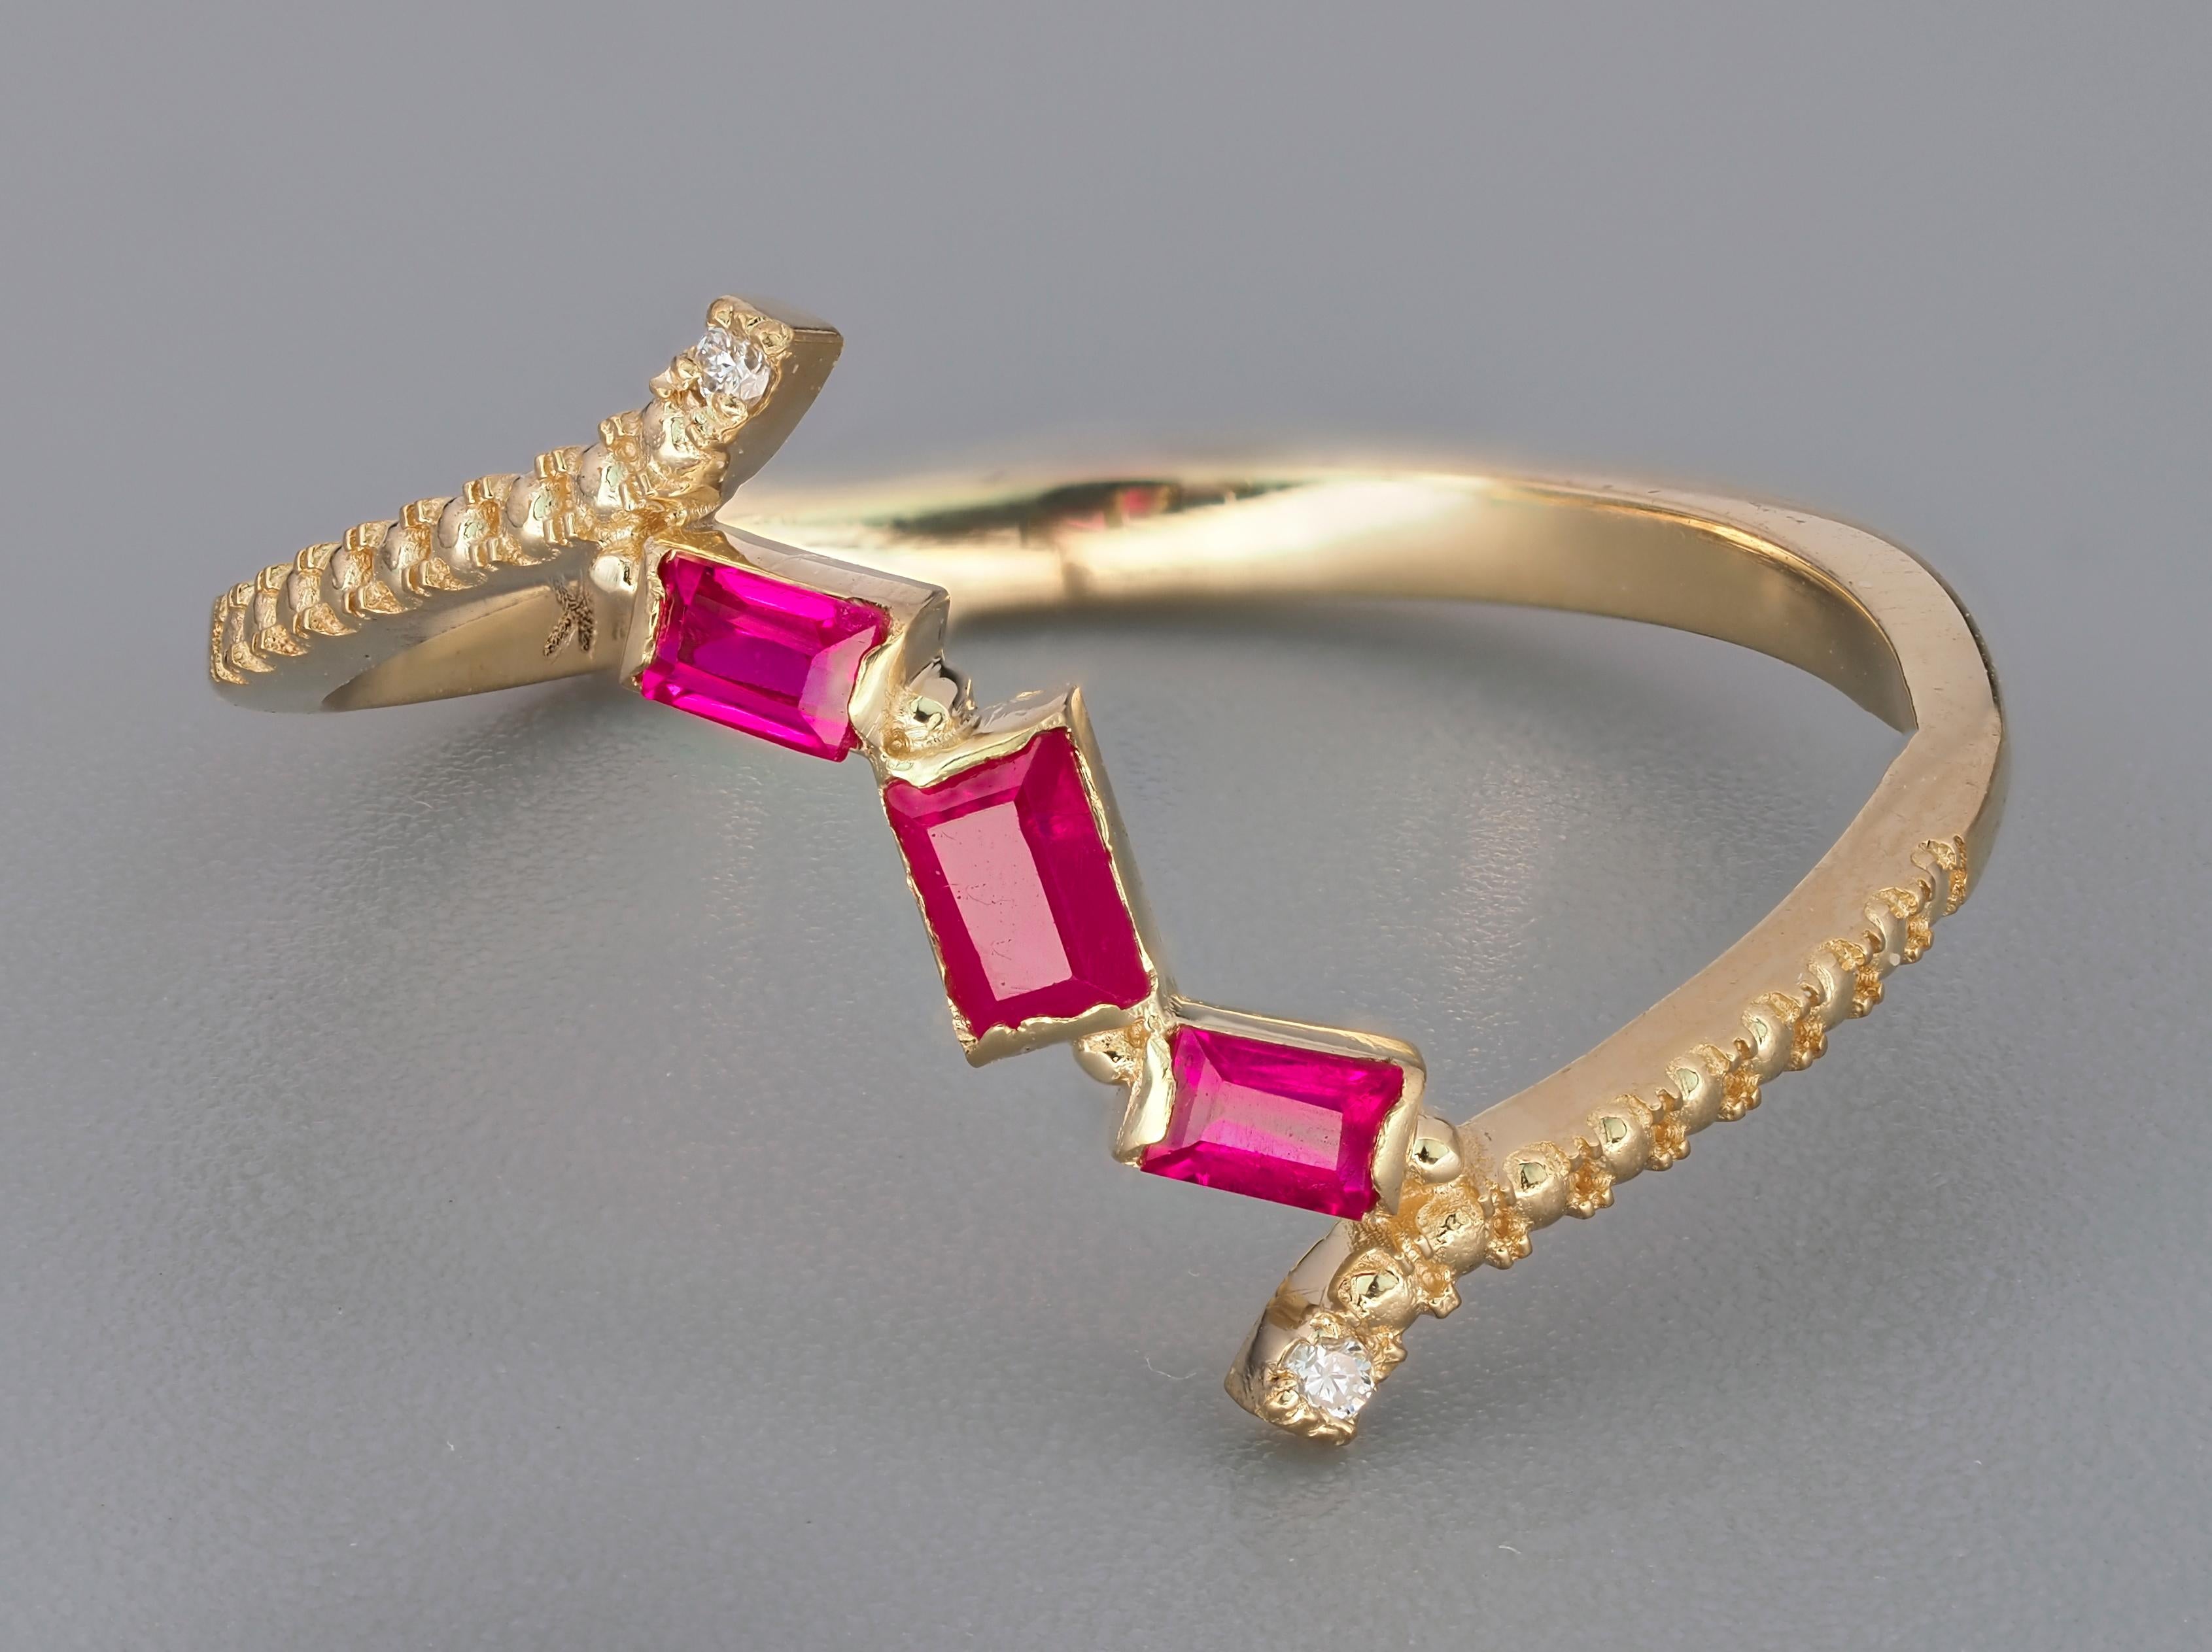 Baguette Cut 14k Gold Ring with Rubies and Diamonds, Baguette Ruby Ring